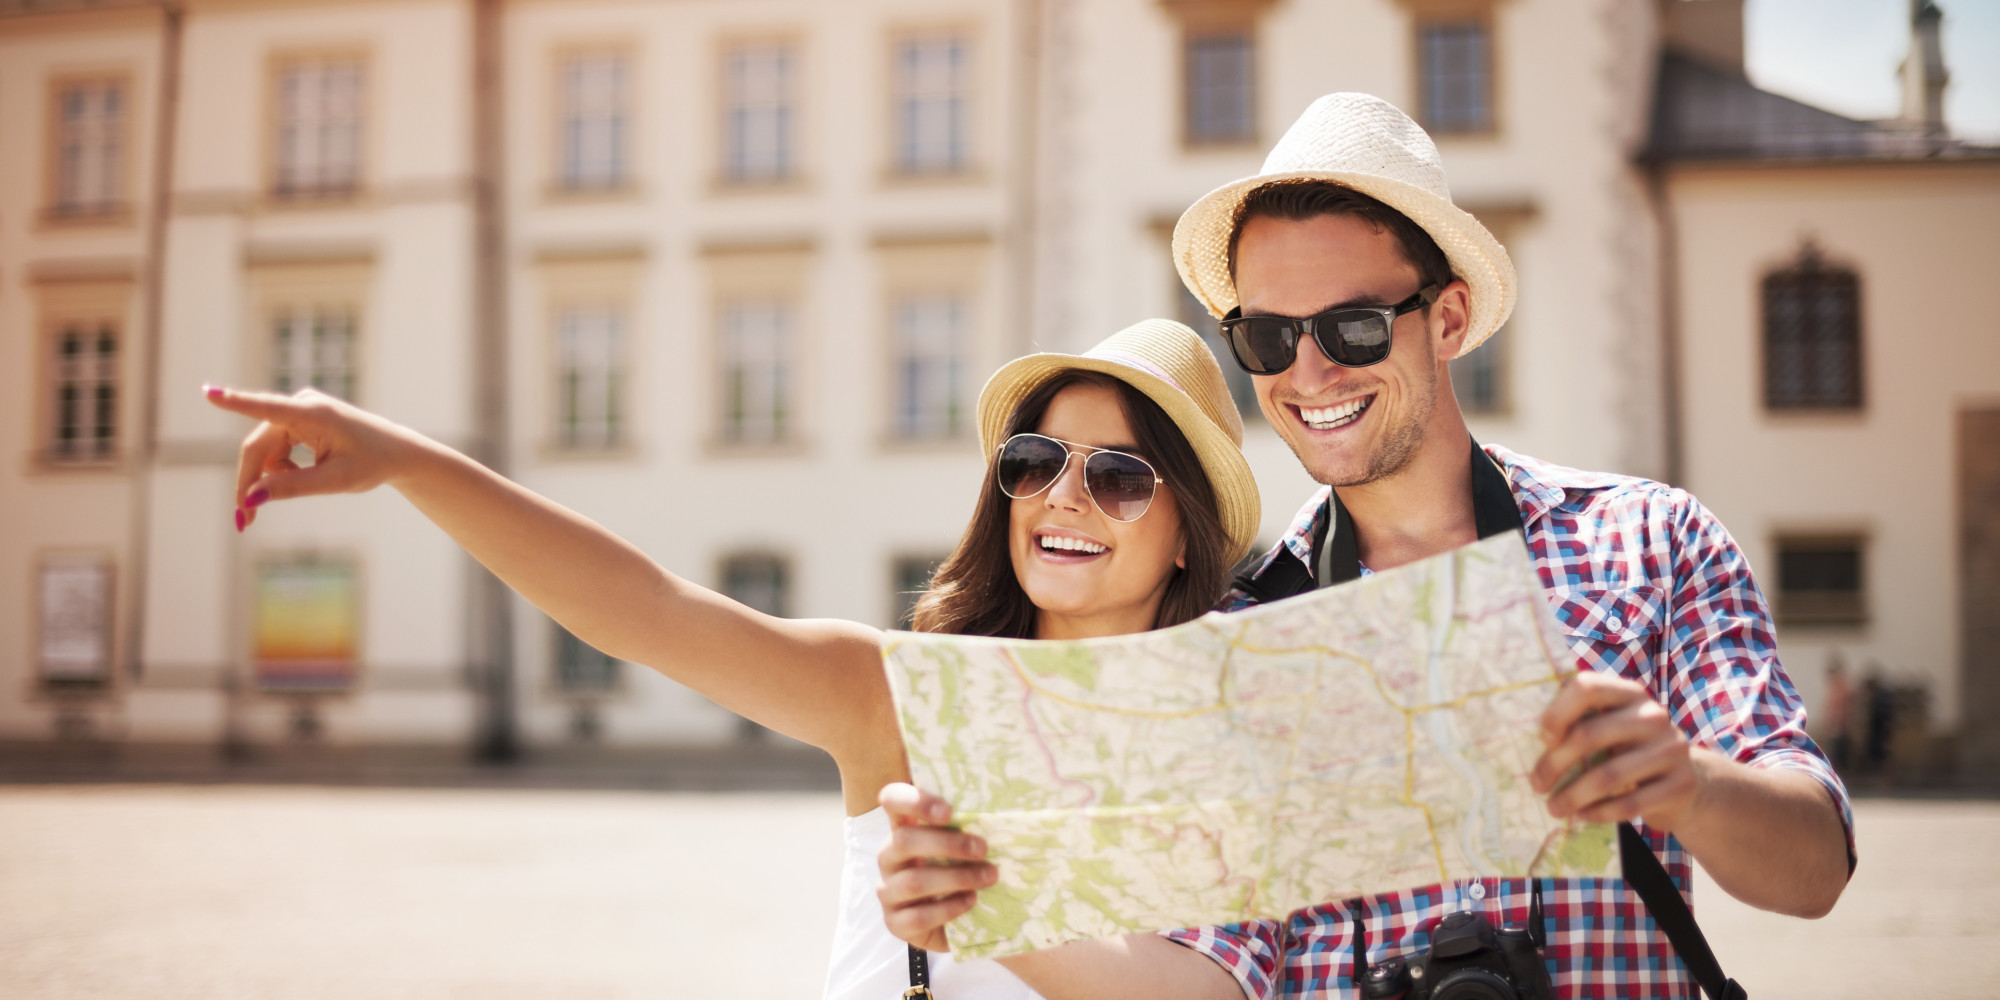 The Advantages of Looking Like a Tourist | HuffPost